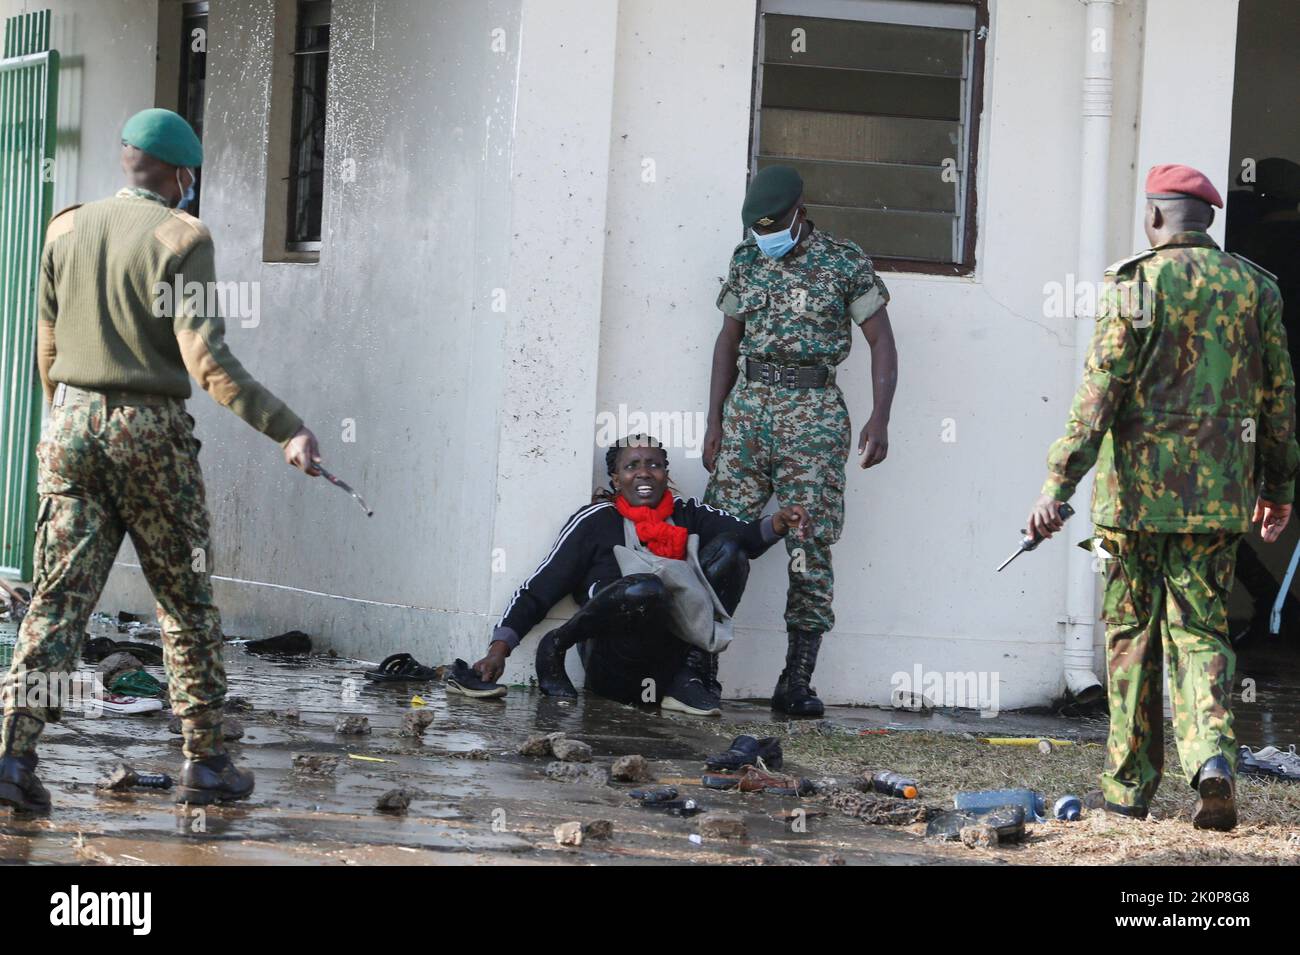 Security officers look at a woman injured in a stampede as they attempt to control people jostling to attend the inauguration of Kenya's President William Ruto before his swearing-in ceremony at the Moi International Stadium Kasarani in Nairobi, Kenya September 13, 2022. REUTERS/Thomas Mukoya     TPX IMAGES OF THE DAY Stock Photo